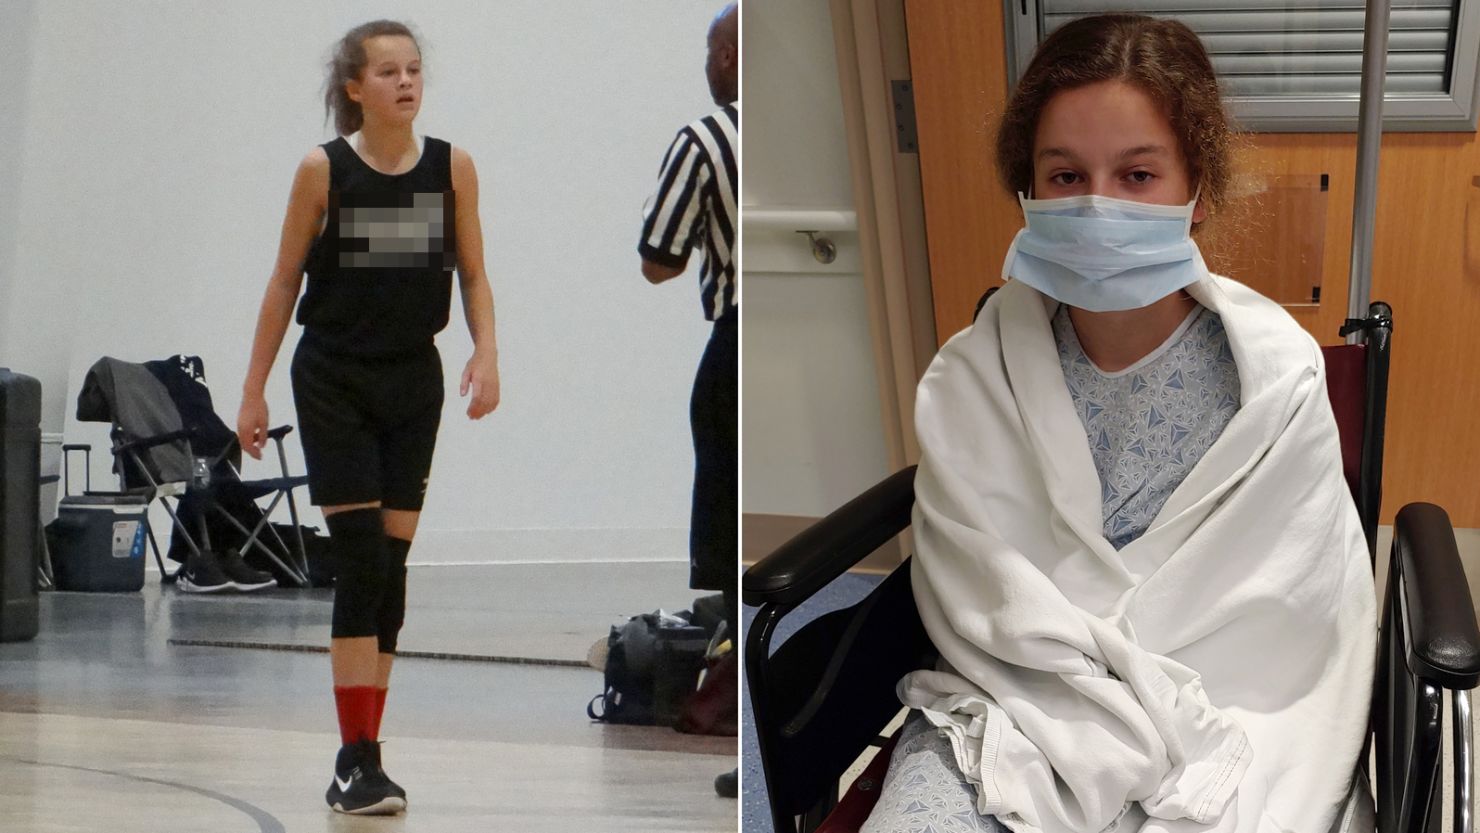 Joeyanna Hodnett has been grappling with Covid-19 symptoms for six months, taking her away from the sport she loves. 